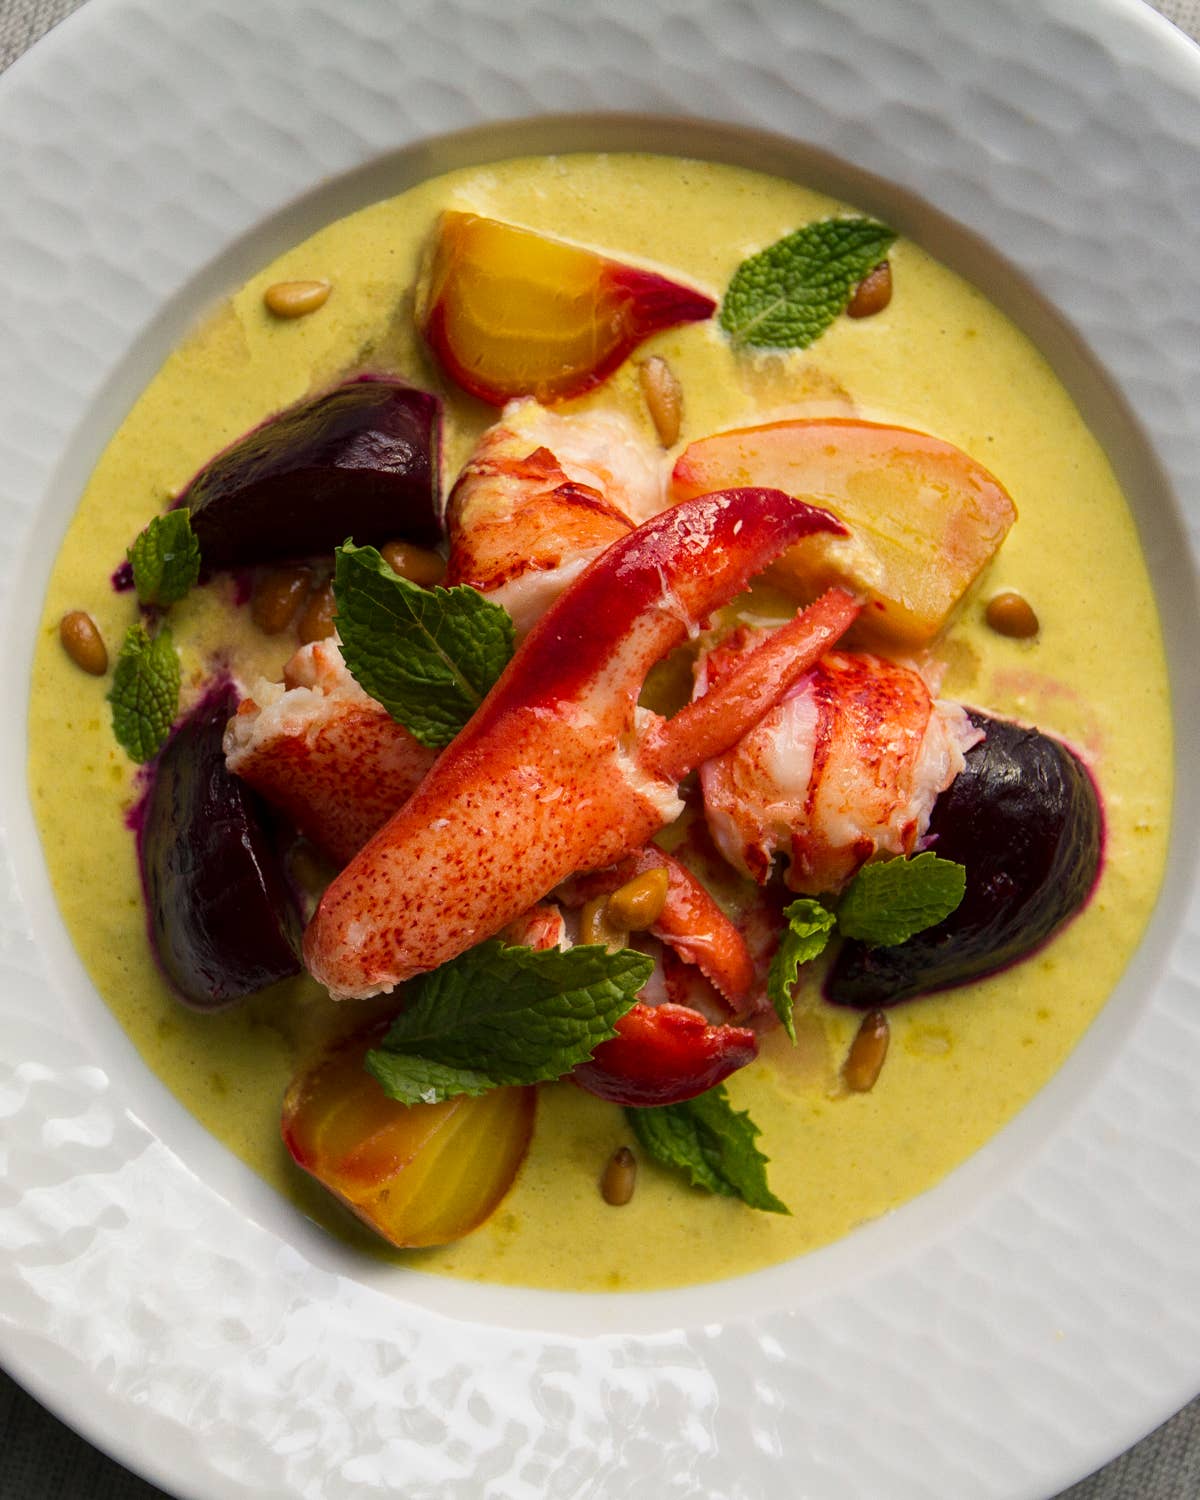 Butter-Poached Lobster with Asparagus-Saffron Cream and Roasted Beets